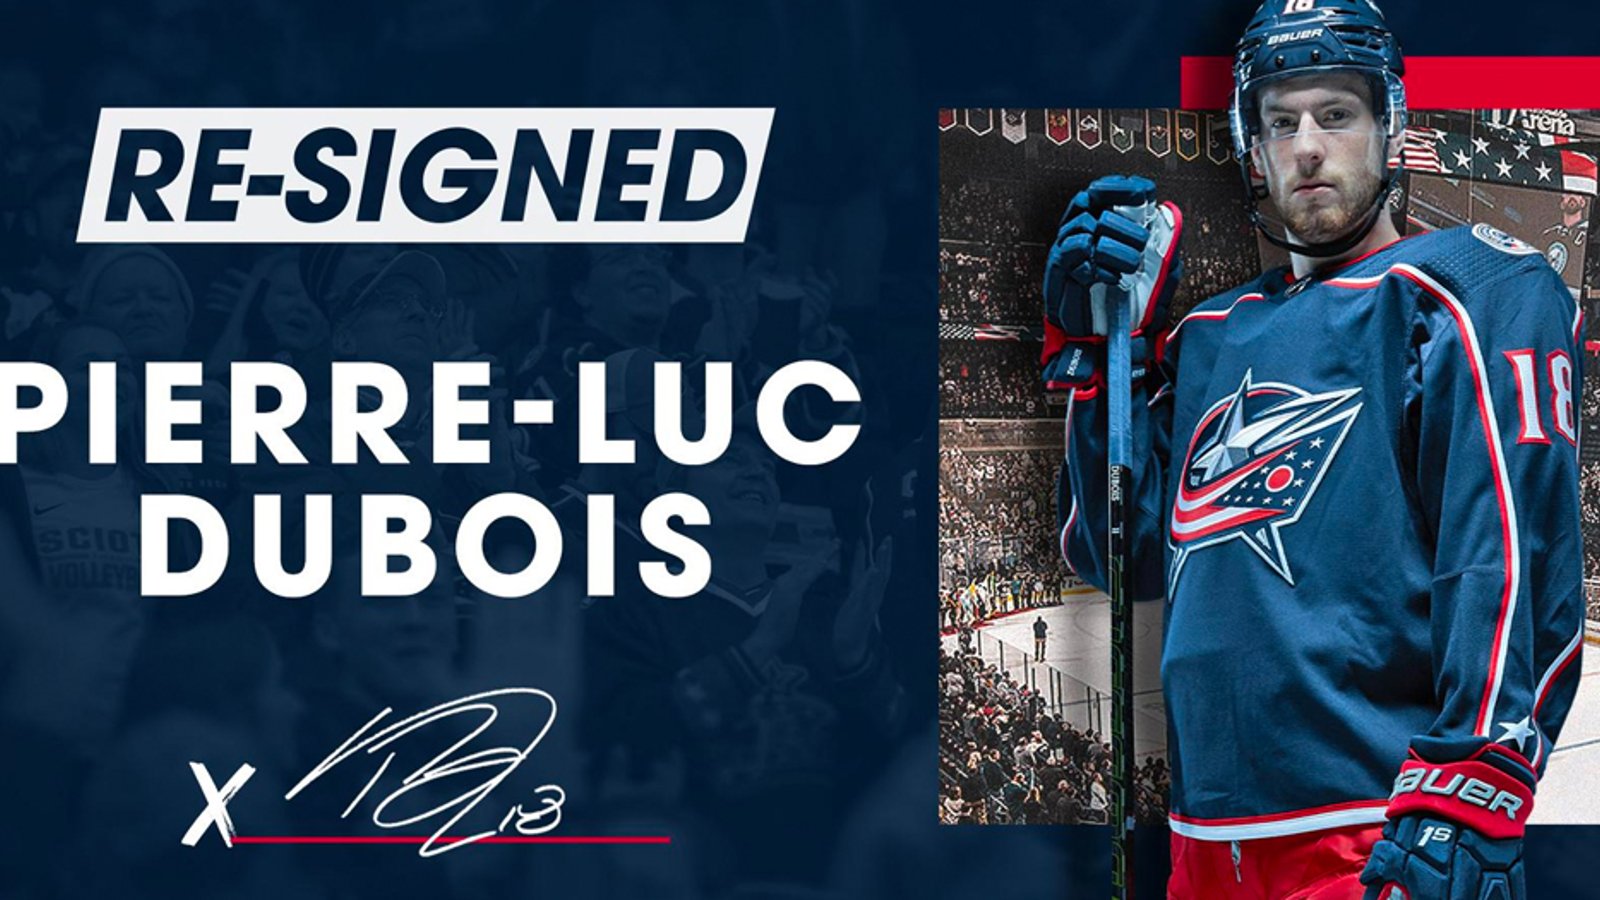 Dubois shakes off trade rumours, signs a short-term deal with Blue Jackets